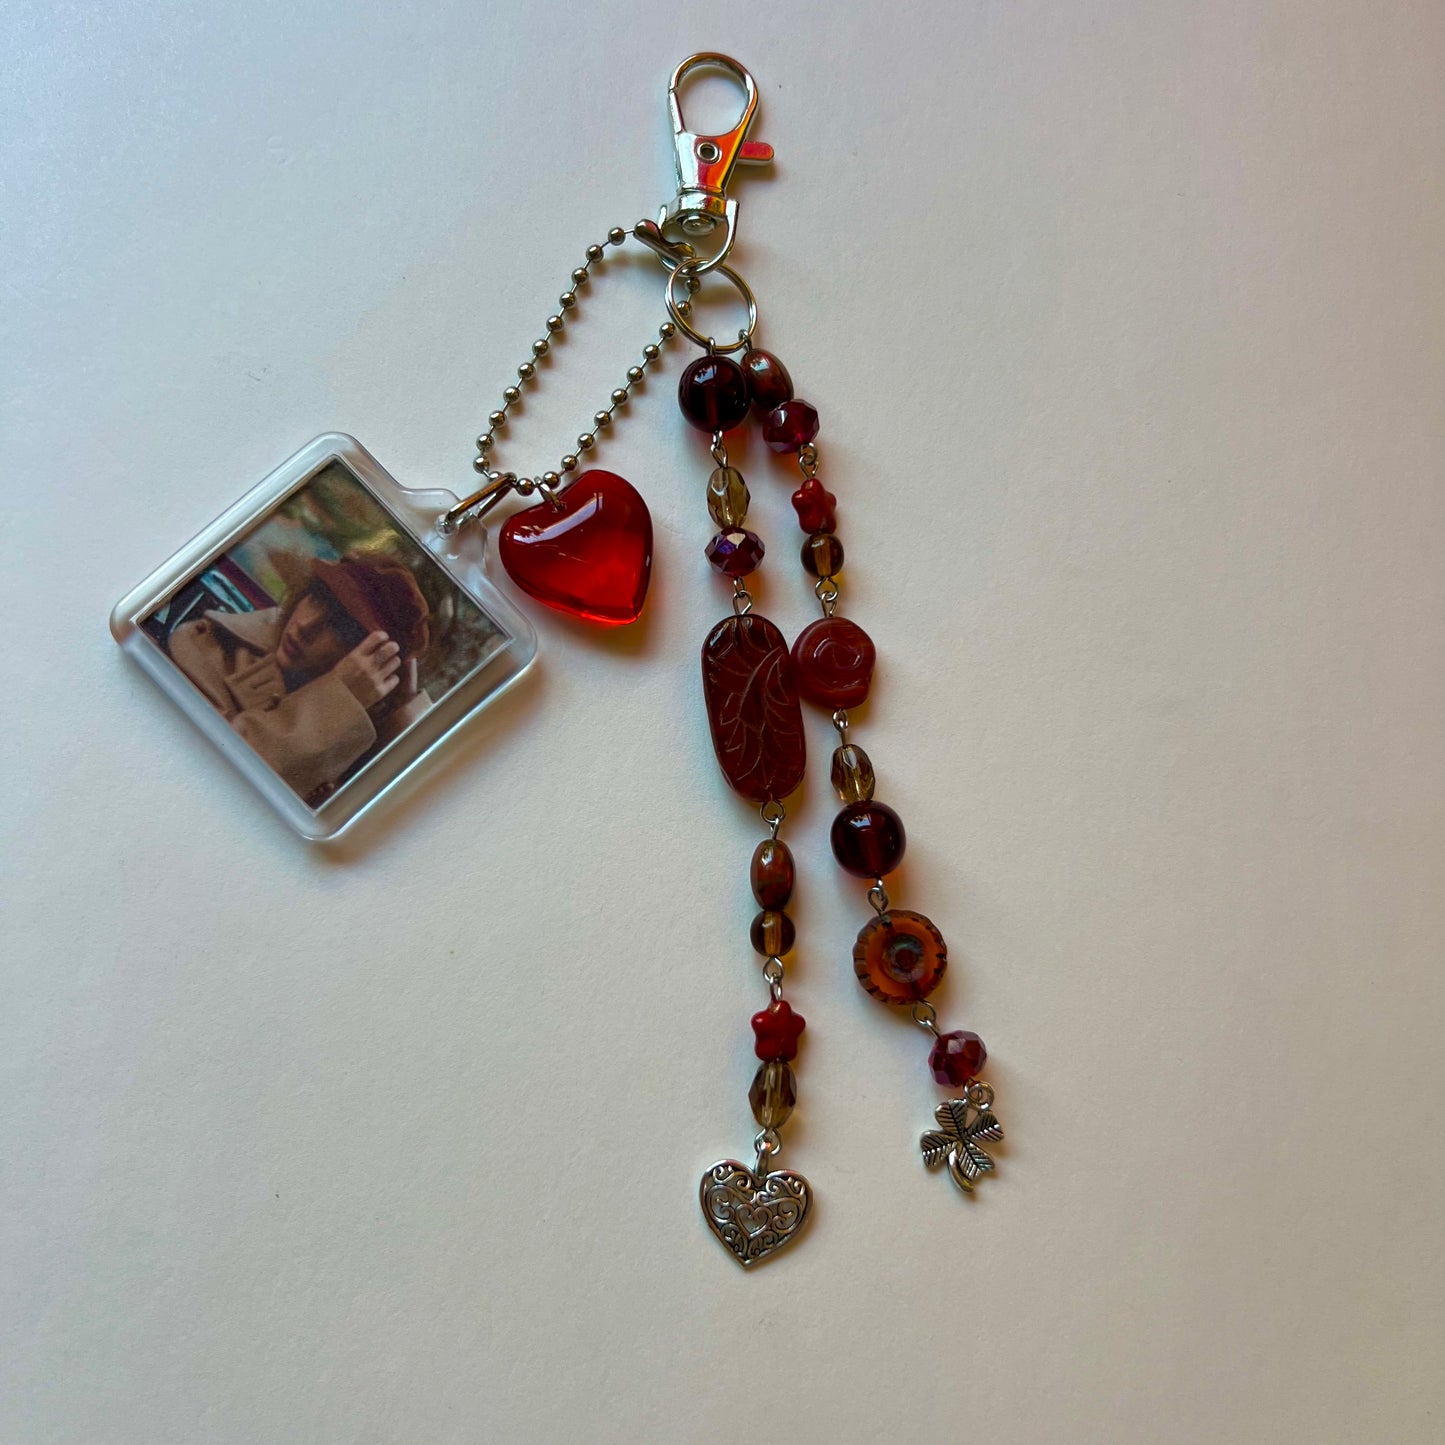 RED (Taylor’s Version) Taylor Swift Keychain